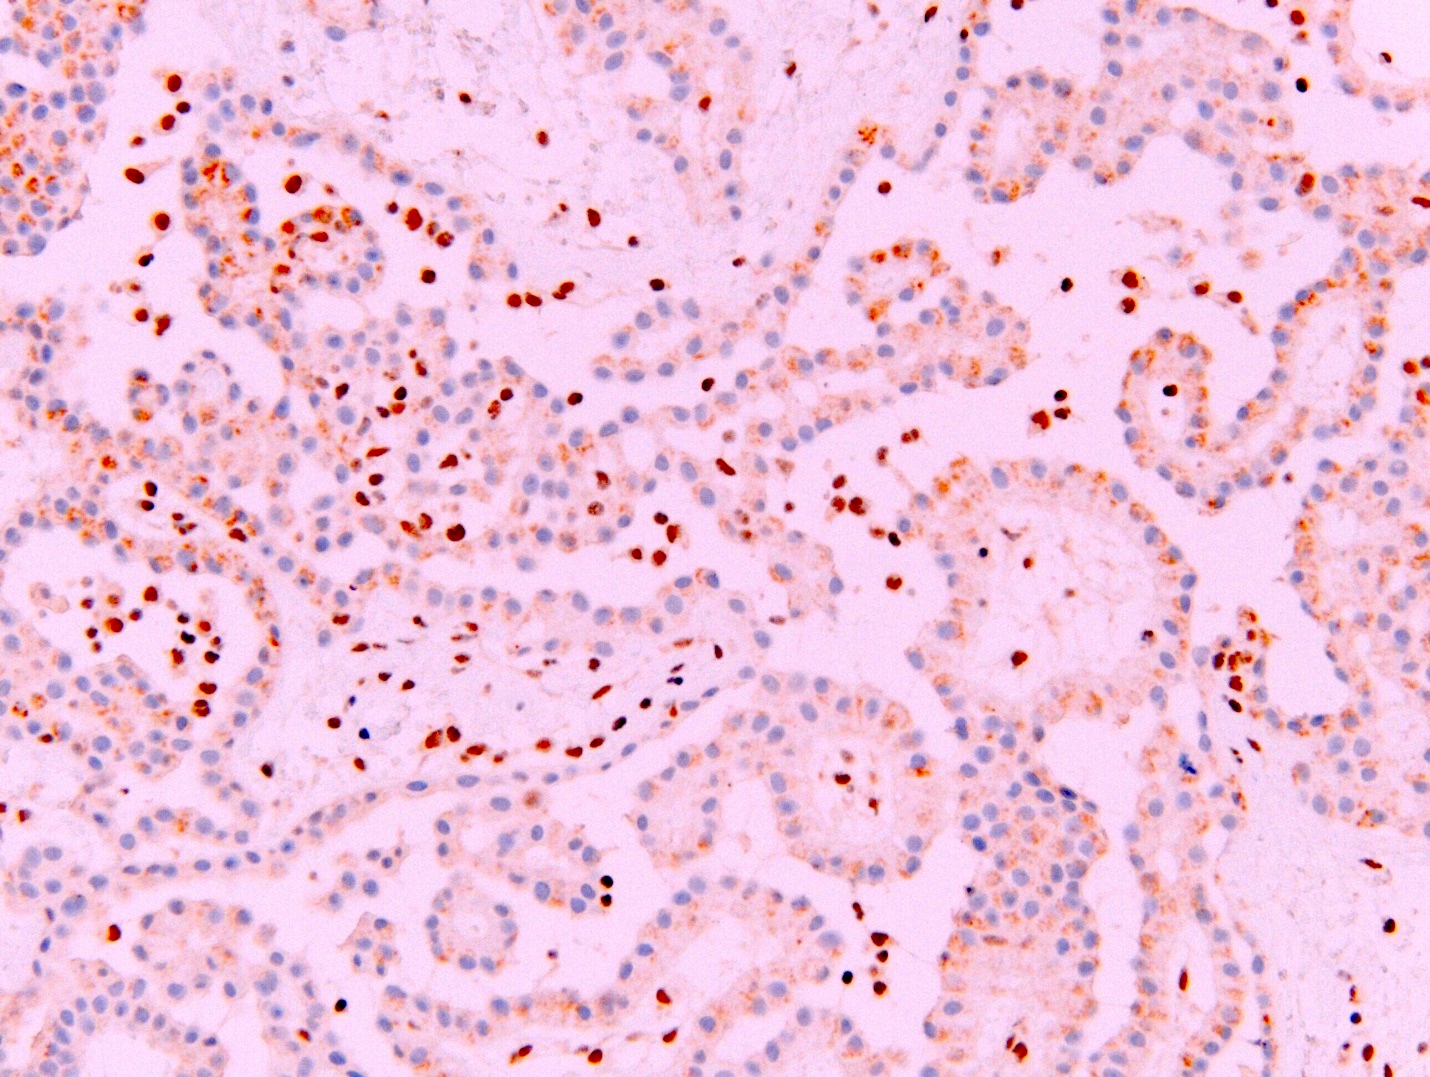 Epithelioid mesothelioma with papillary features